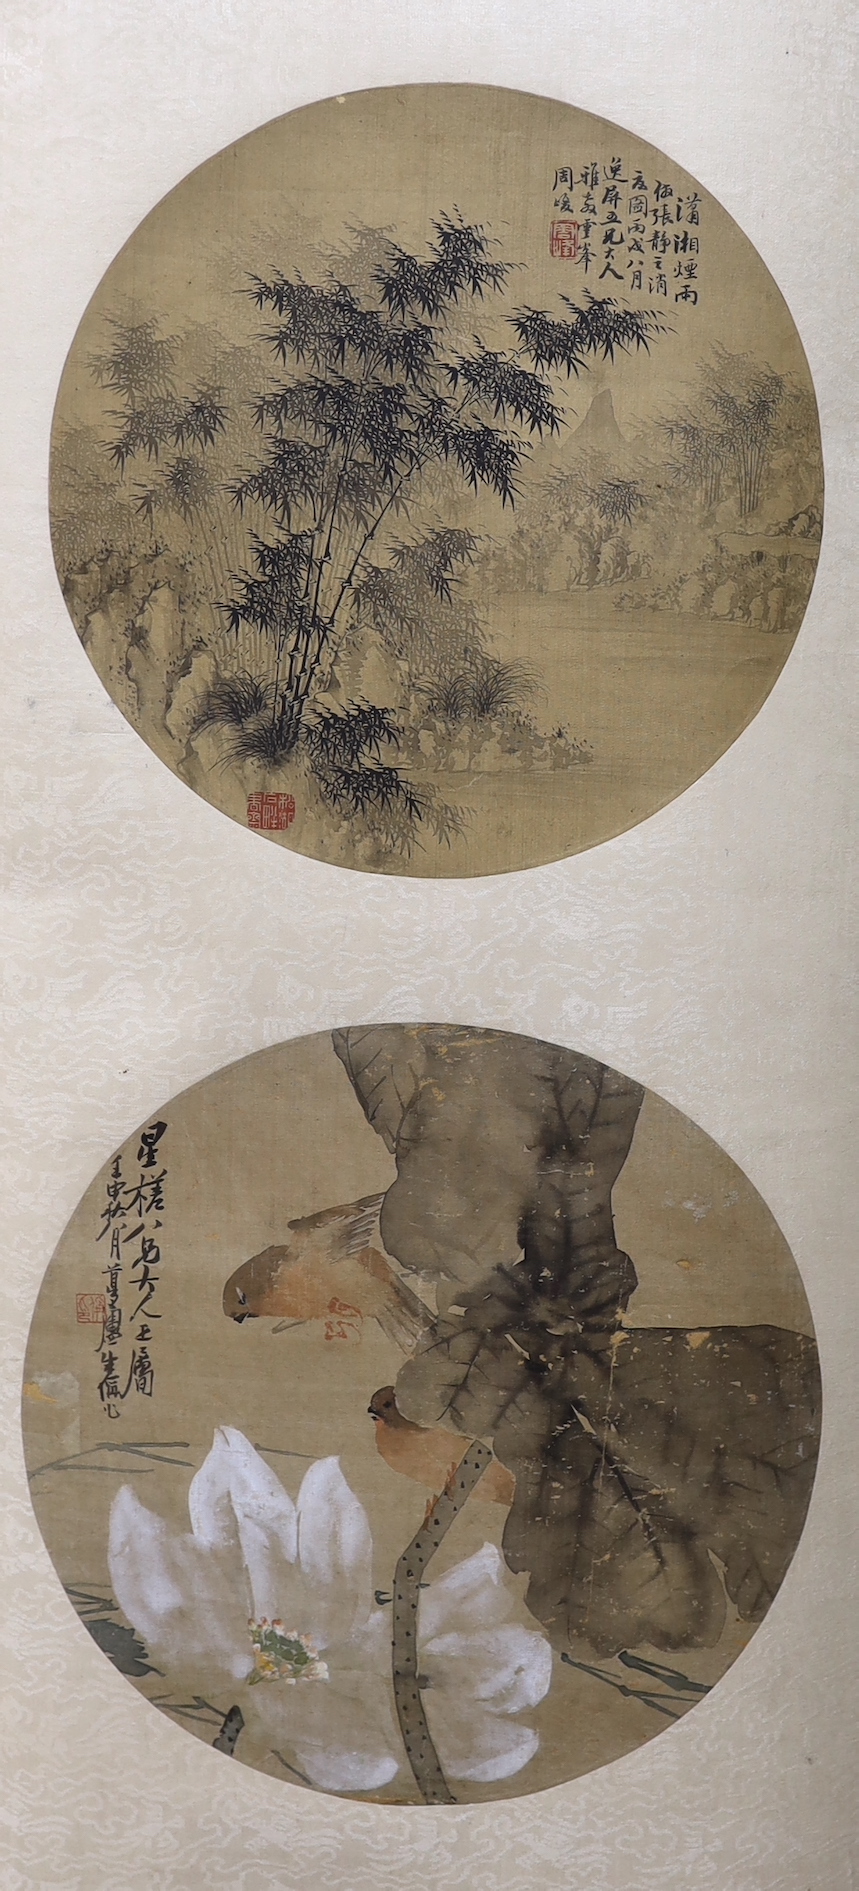 Two Chinese painted and inscribed fan panels on silk, late Qing dynasty, mounted on a scroll, panels